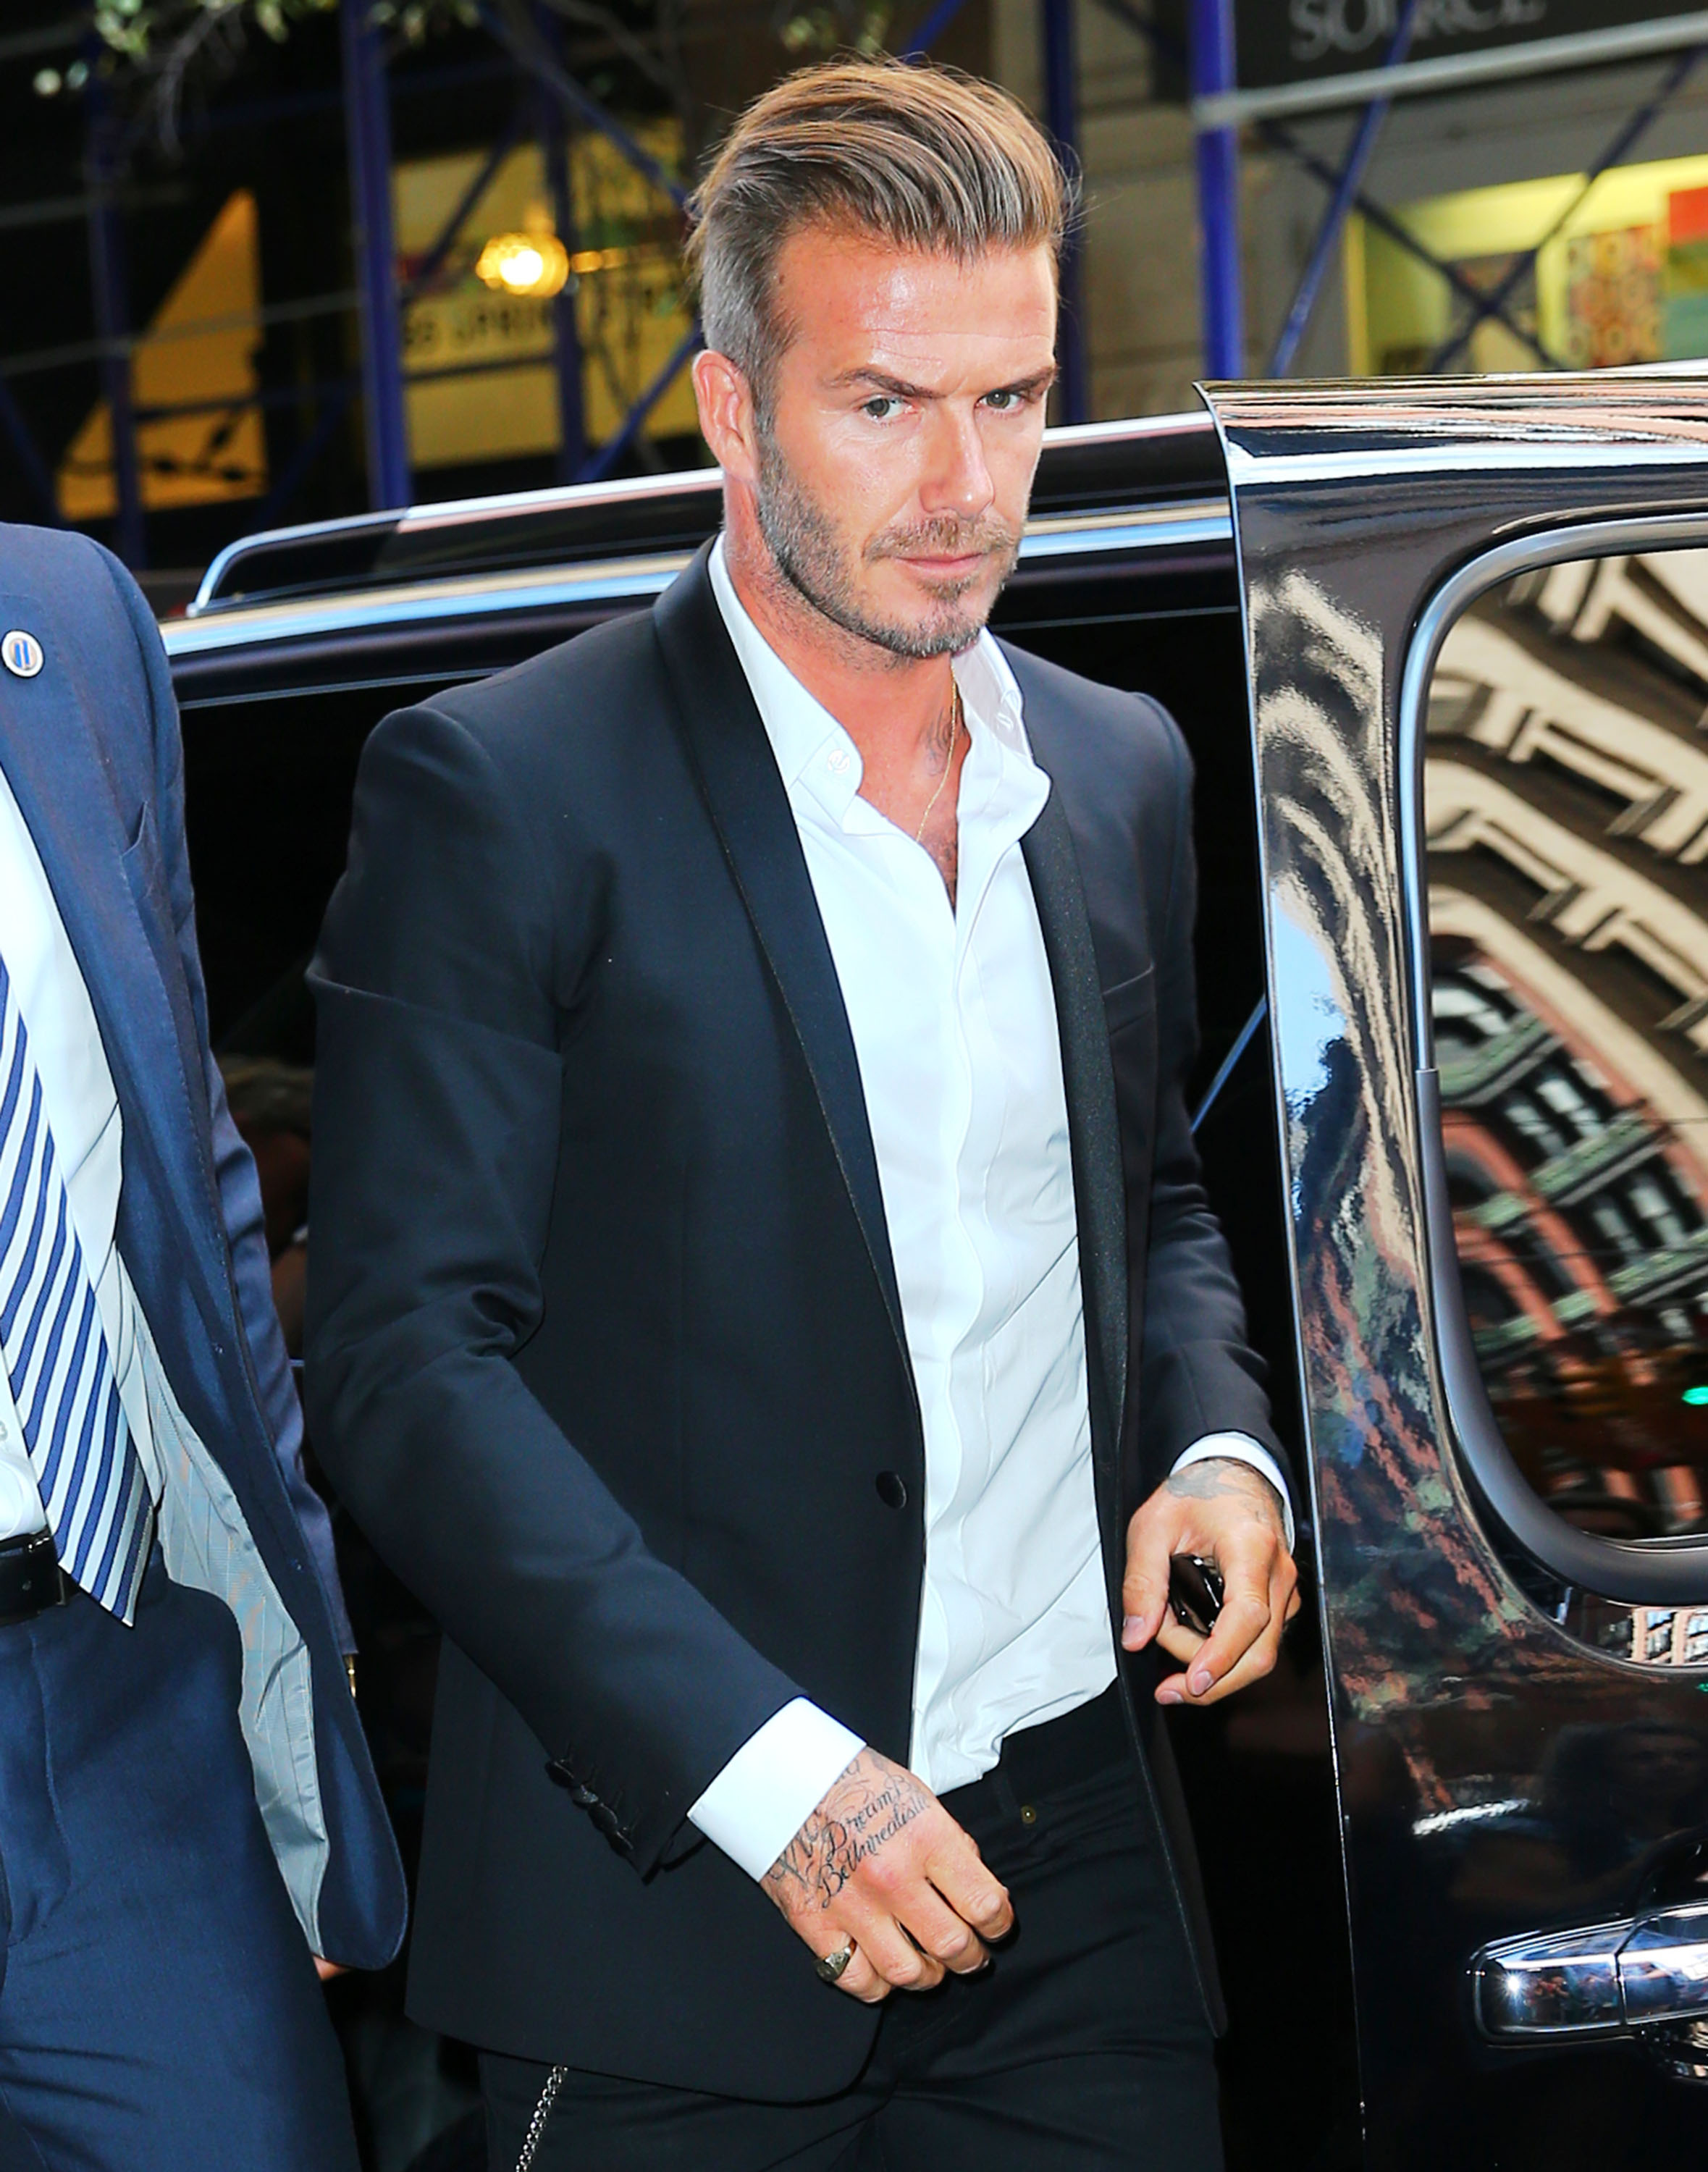 How to look like David Beckham In a Morning Suit! - Whitfield & Ward